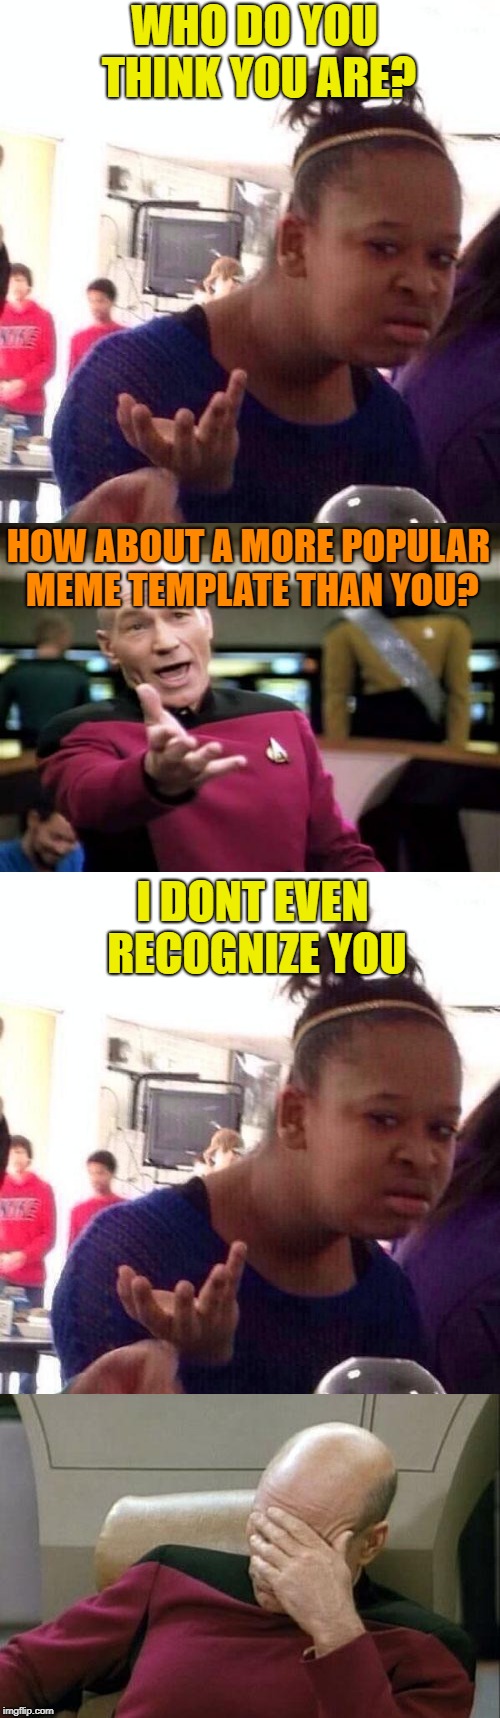 a losing battle | WHO DO YOU THINK YOU ARE? HOW ABOUT A MORE POPULAR MEME TEMPLATE THAN YOU? I DONT EVEN RECOGNIZE YOU | image tagged in captain picard facepalm,black girl wat,picard wtf,argument | made w/ Imgflip meme maker